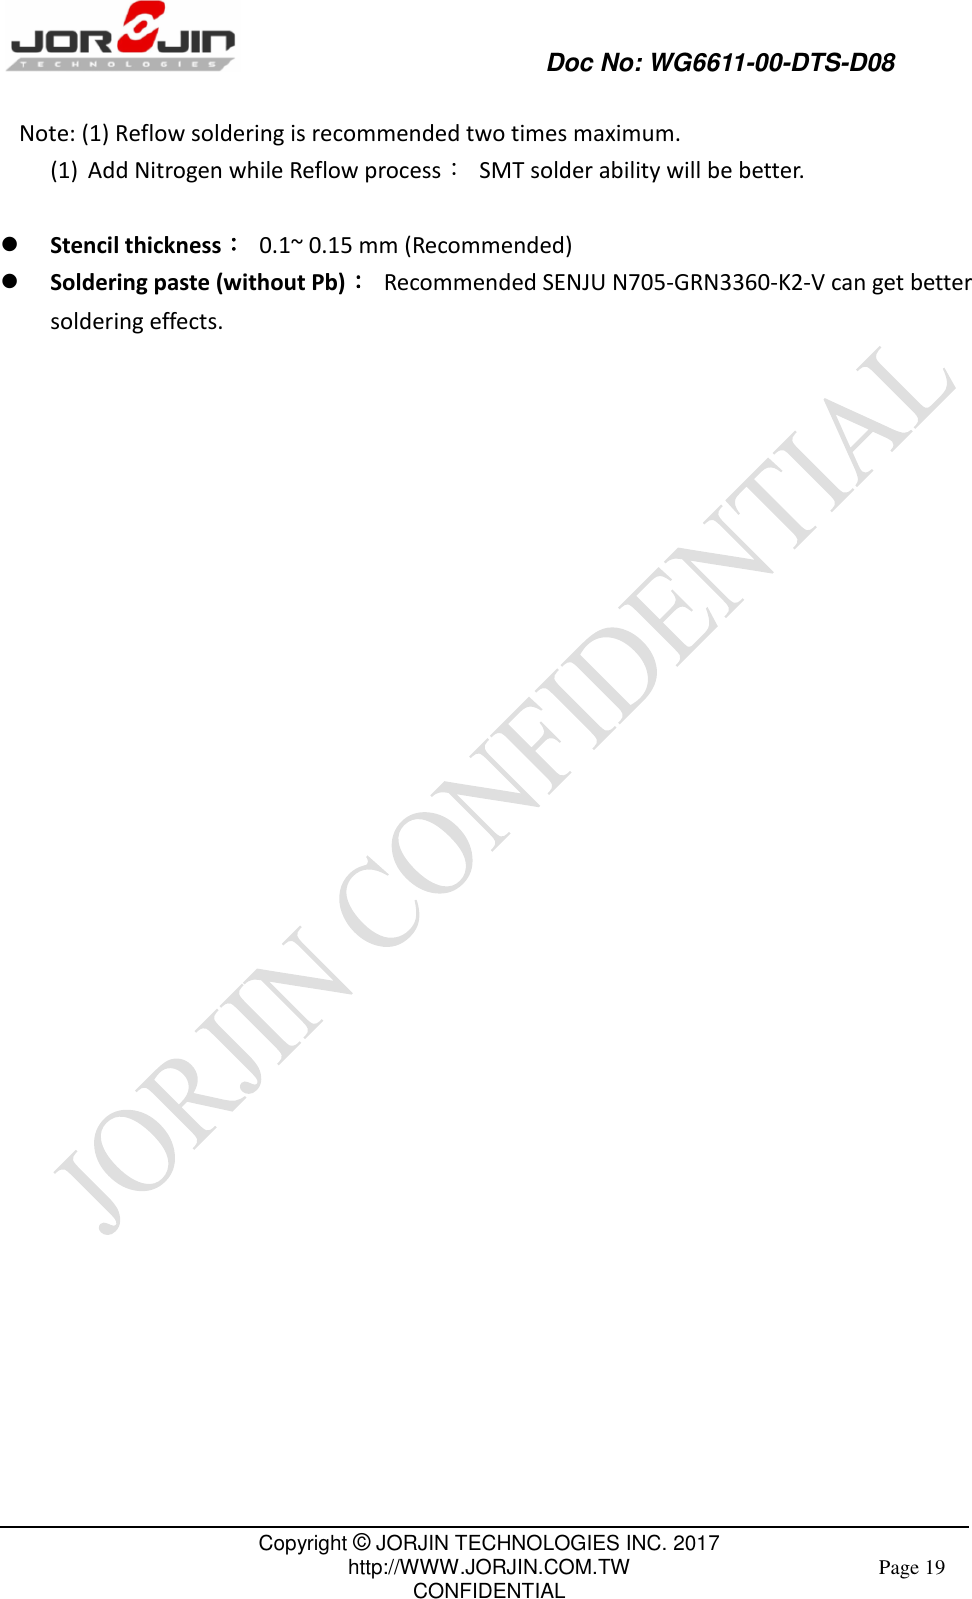             Doc No: WG6611-00-DTS-D08                                                                                               Copyright © JORJIN TECHNOLOGIES INC. 2017 http://WWW.JORJIN.COM.TW CONFIDENTIAL Page 19  Note: (1) Reflow soldering is recommended two times maximum. (1) Add Nitrogen while Reflow process：  SMT solder ability will be better.   Stencil thickness：  0.1~ 0.15 mm (Recommended)  Soldering paste (without Pb)：  Recommended SENJU N705-GRN3360-K2-V can get better soldering effects.                                